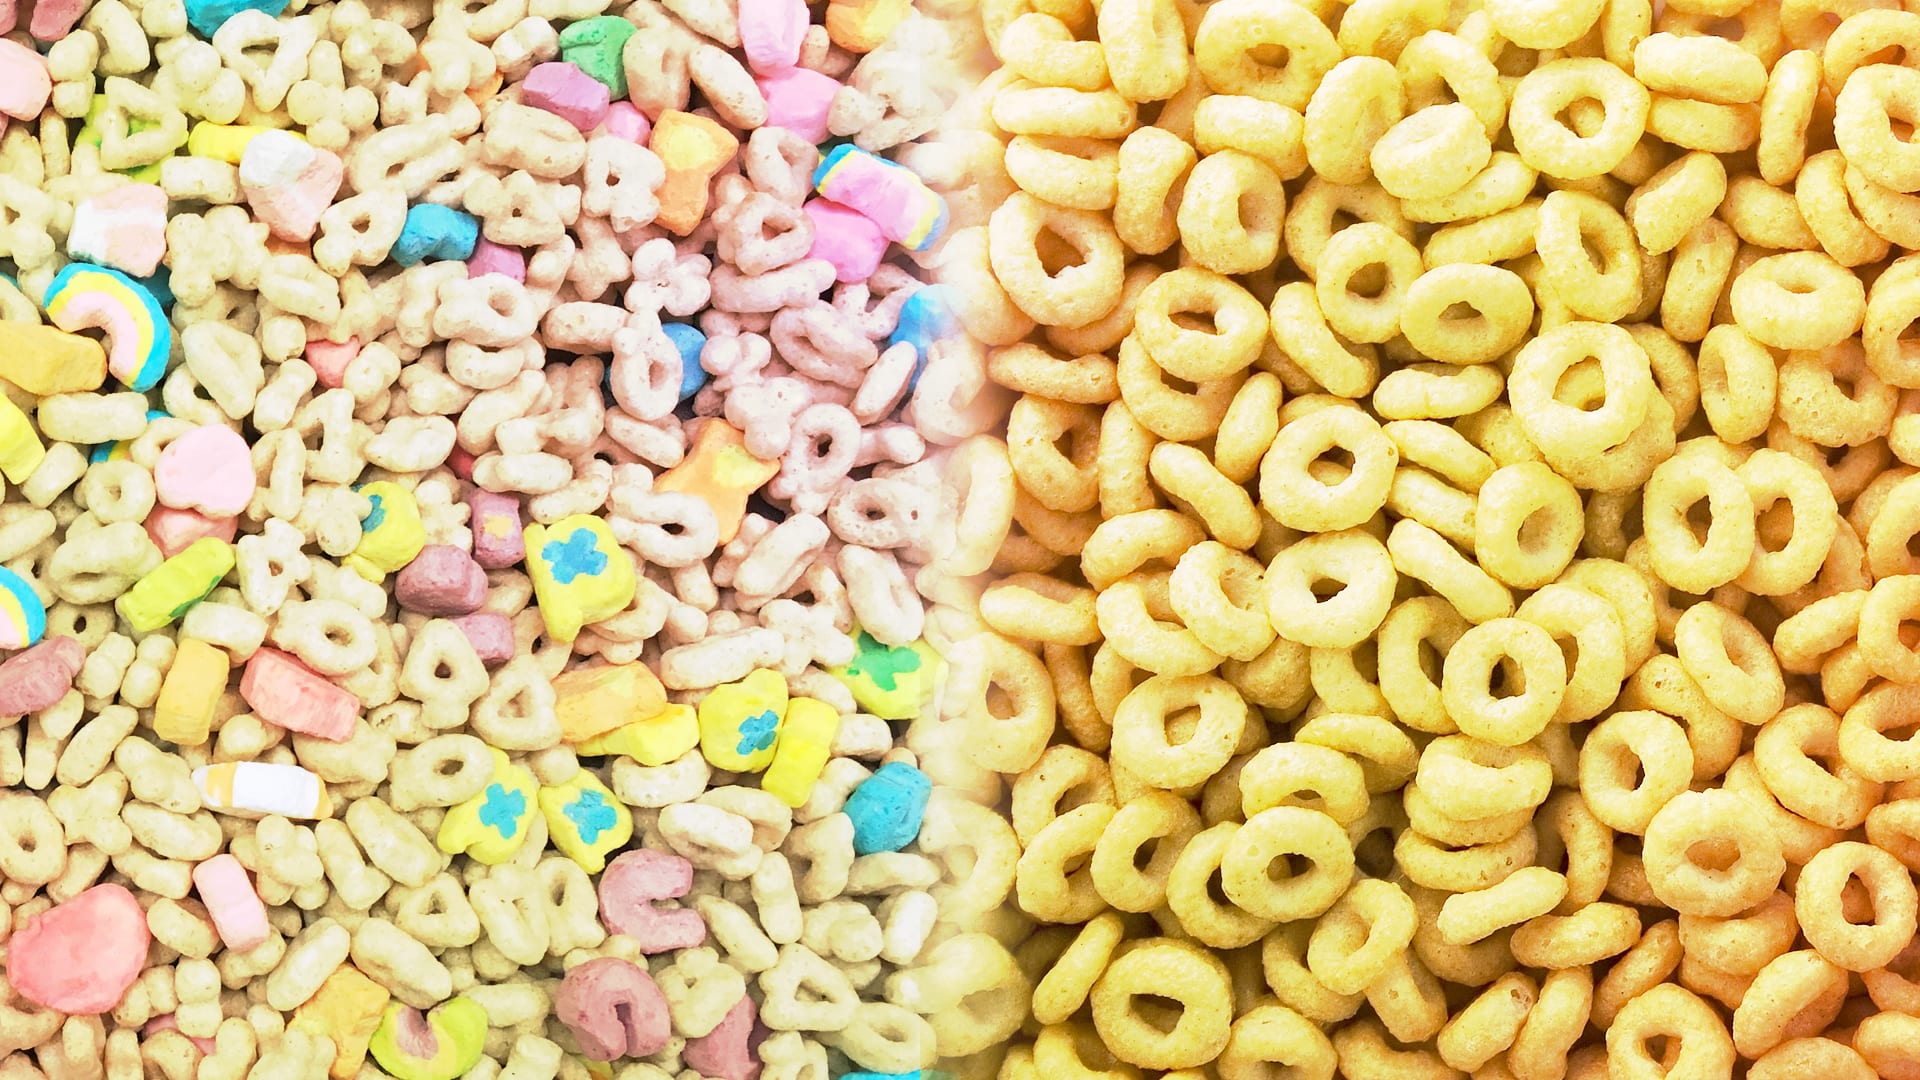 Monsanto fallout: How Cheerios and Quaker Oats responded to glyphosate in cereal reports